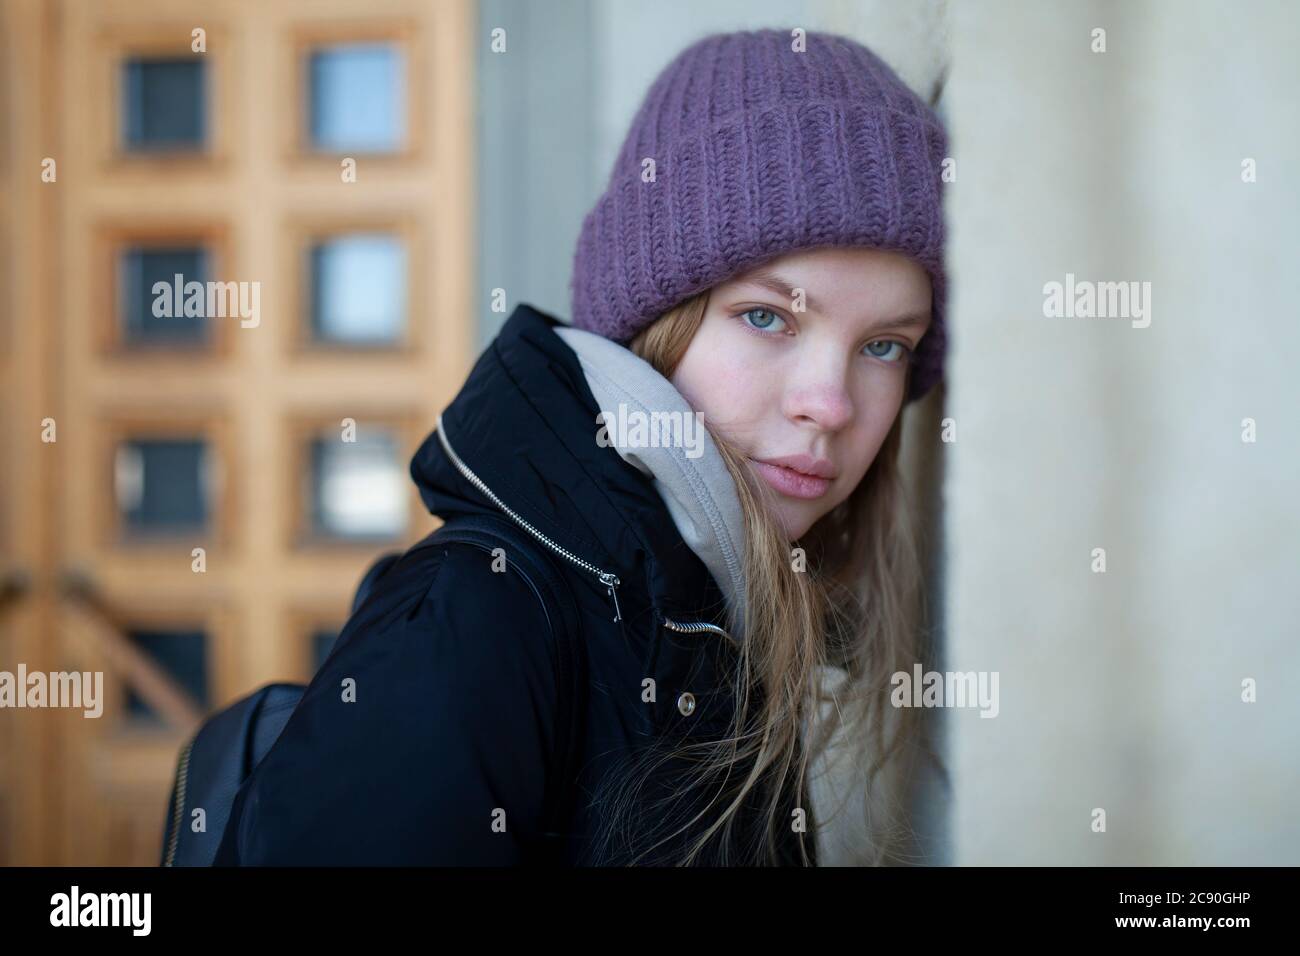 Russia, Novosibirsk, Portrait of young woman in knit hat Stock Photo